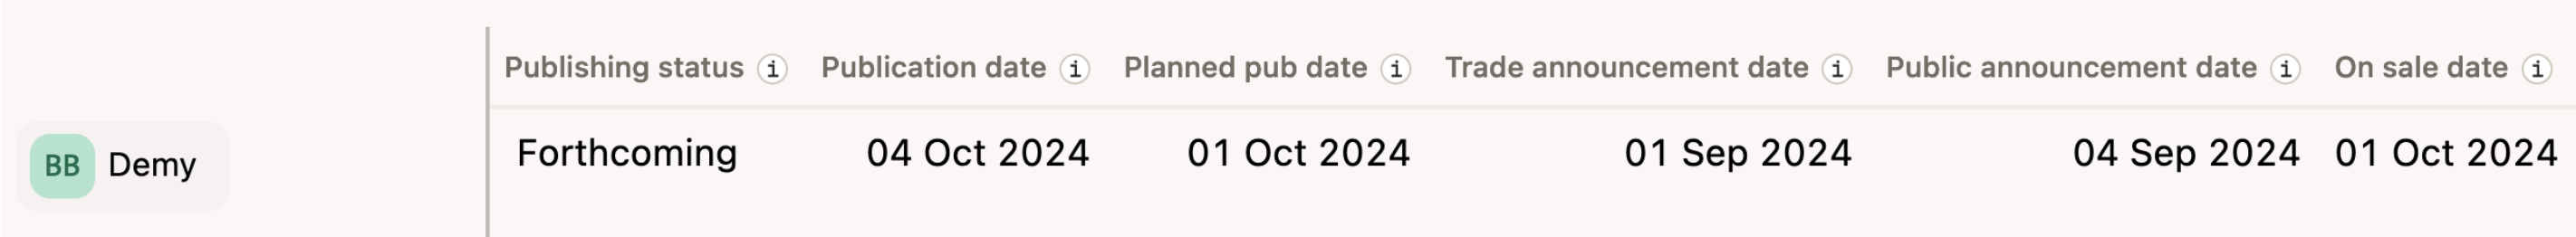 Screenshot of the publication dates in Consonance for a product, showing 4th October 2024 as the date.